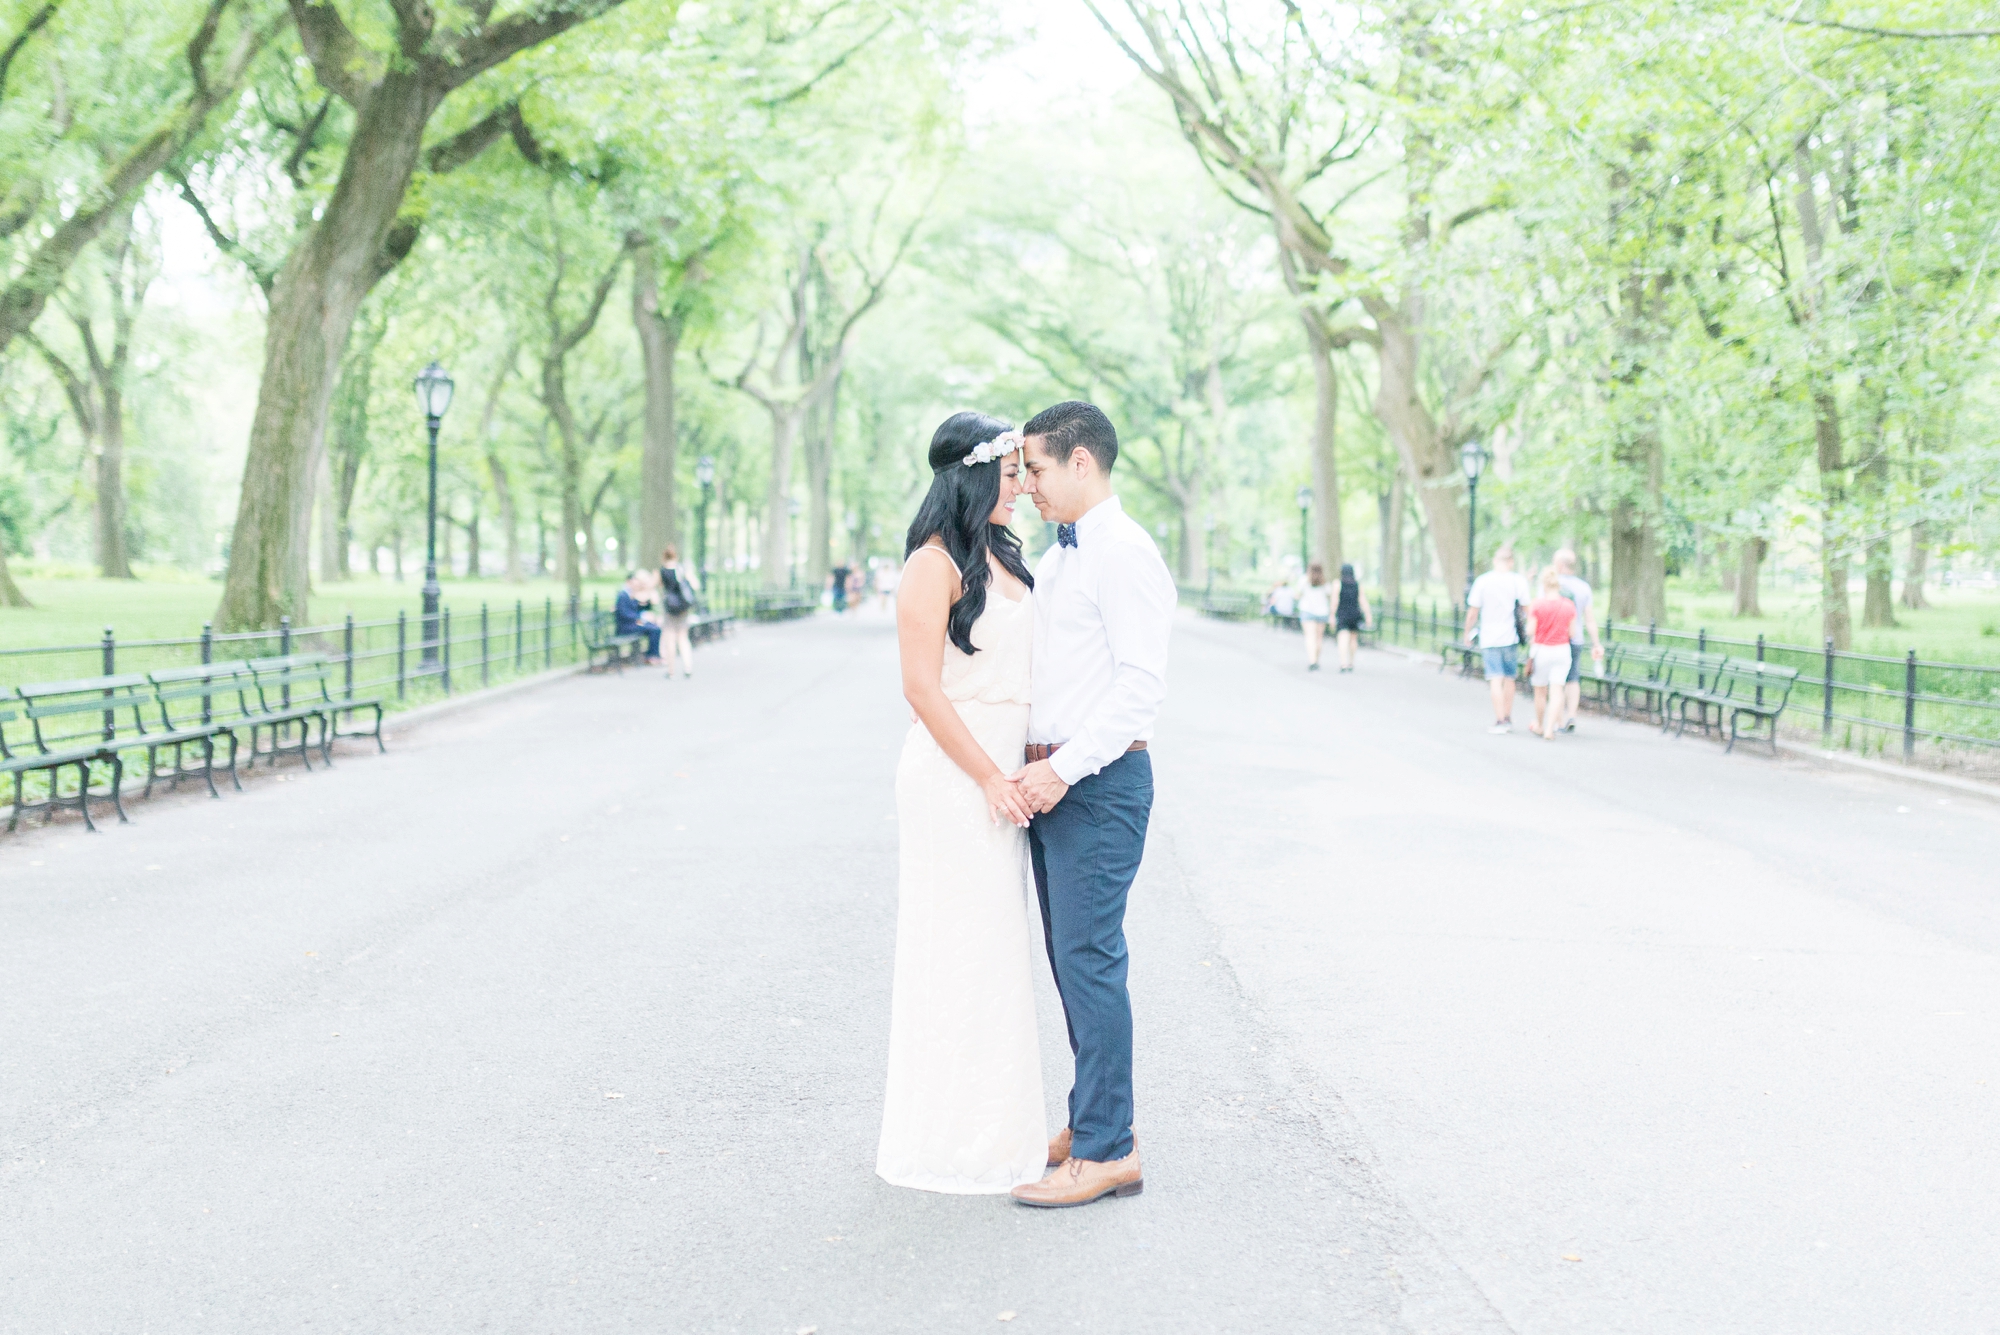 wedding-photography-in-central-park-new-york-city_0211